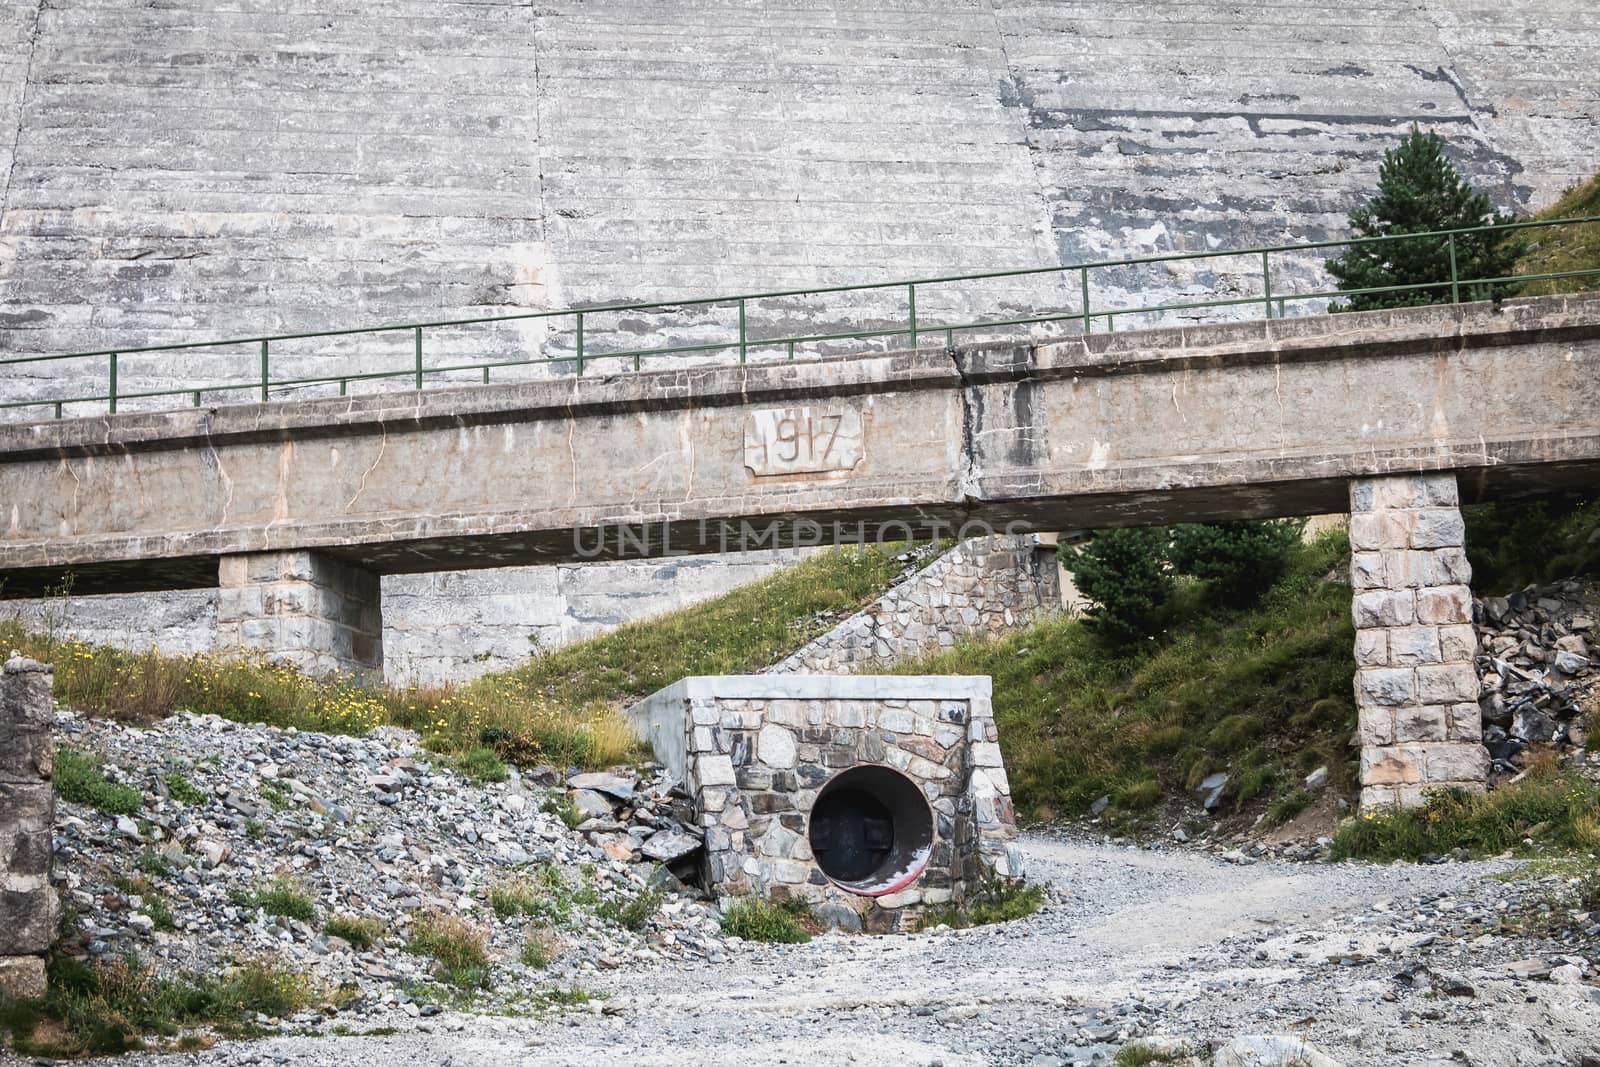 Architecture detail of the Oule hydrolic dam in Saint Lary Soula by AtlanticEUROSTOXX